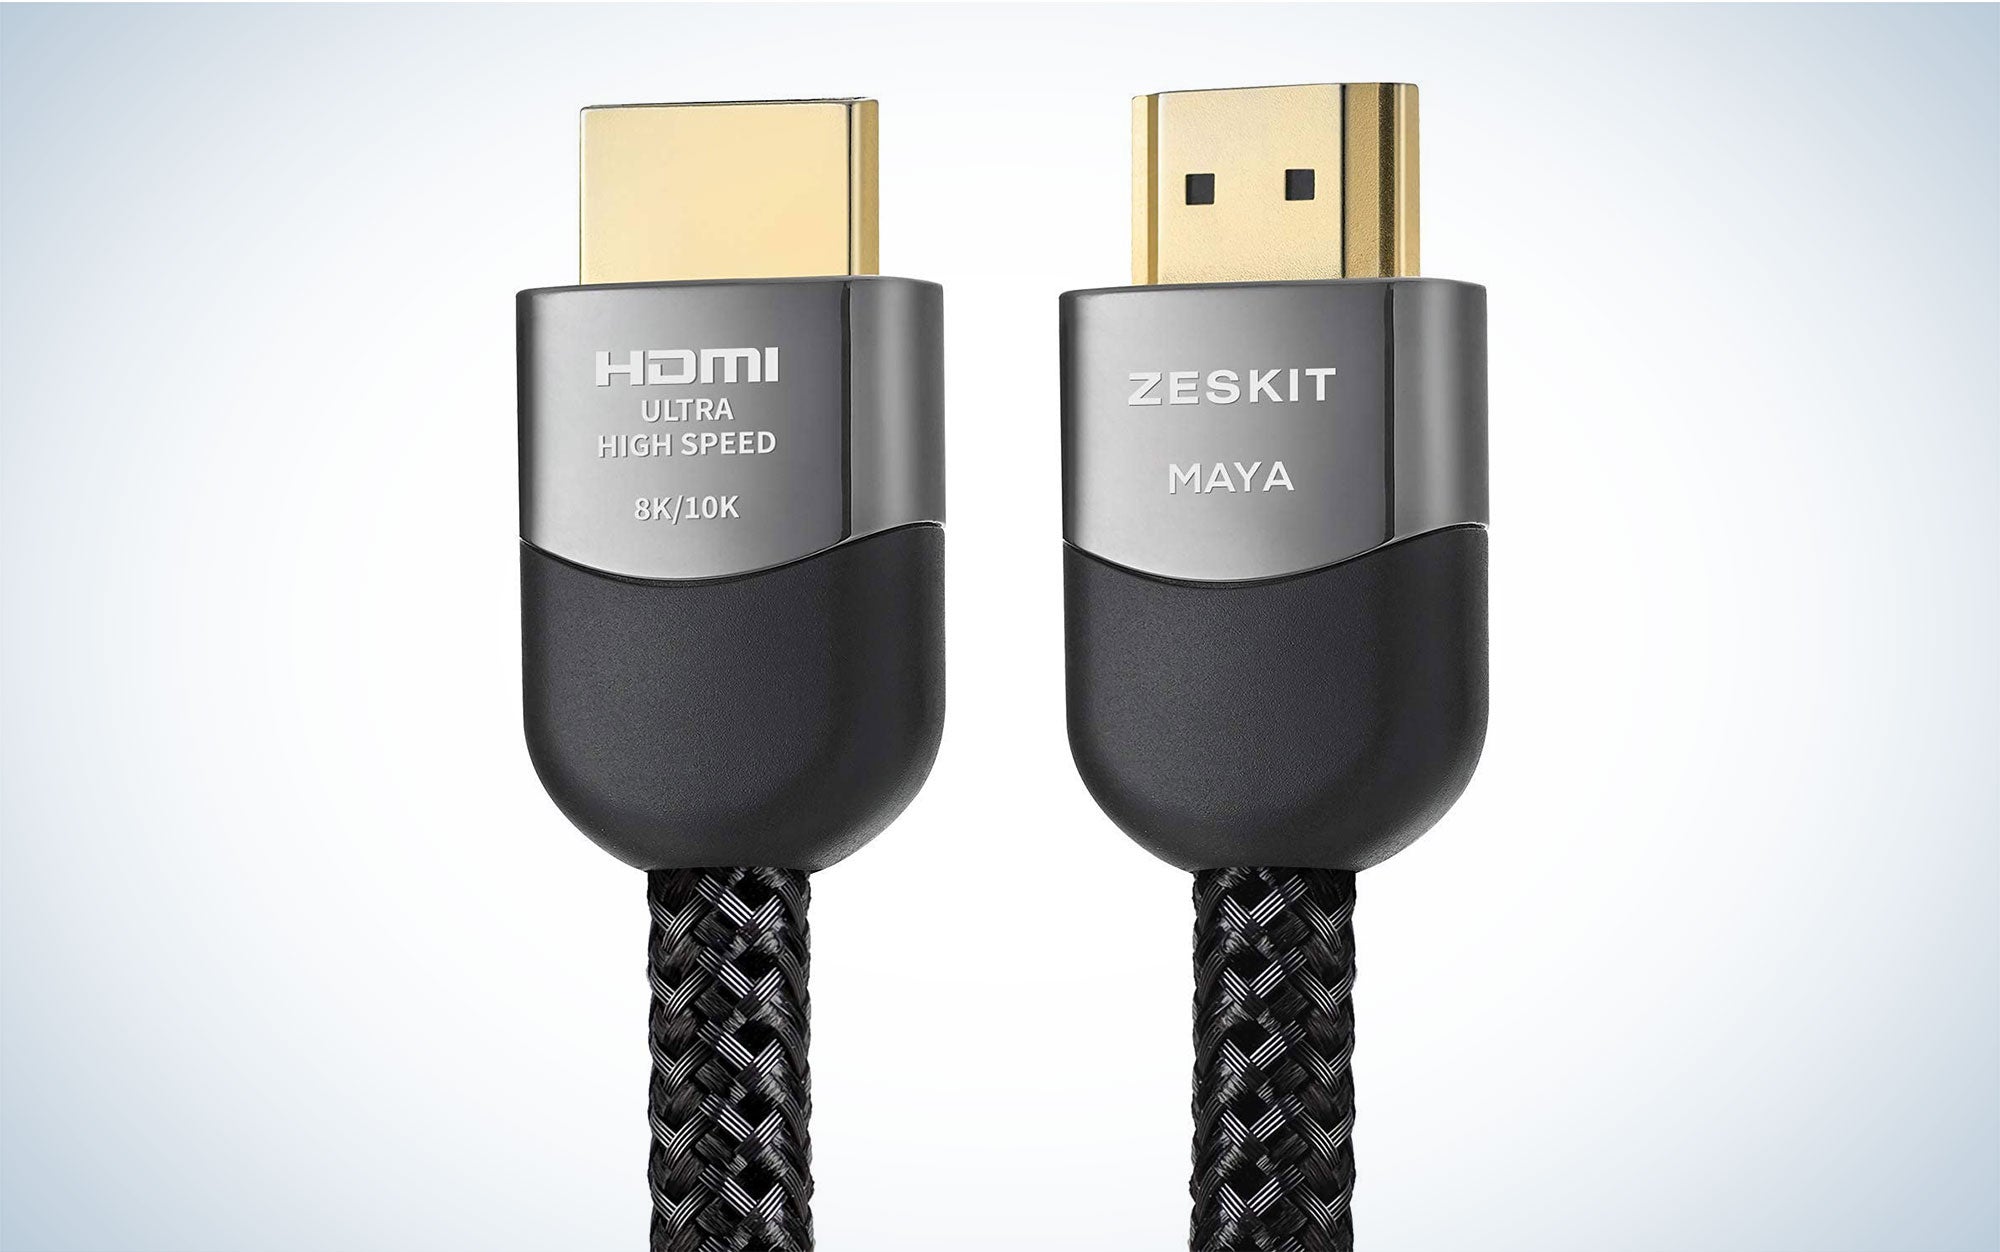 Zeskit Maya is the best HDMI cable.